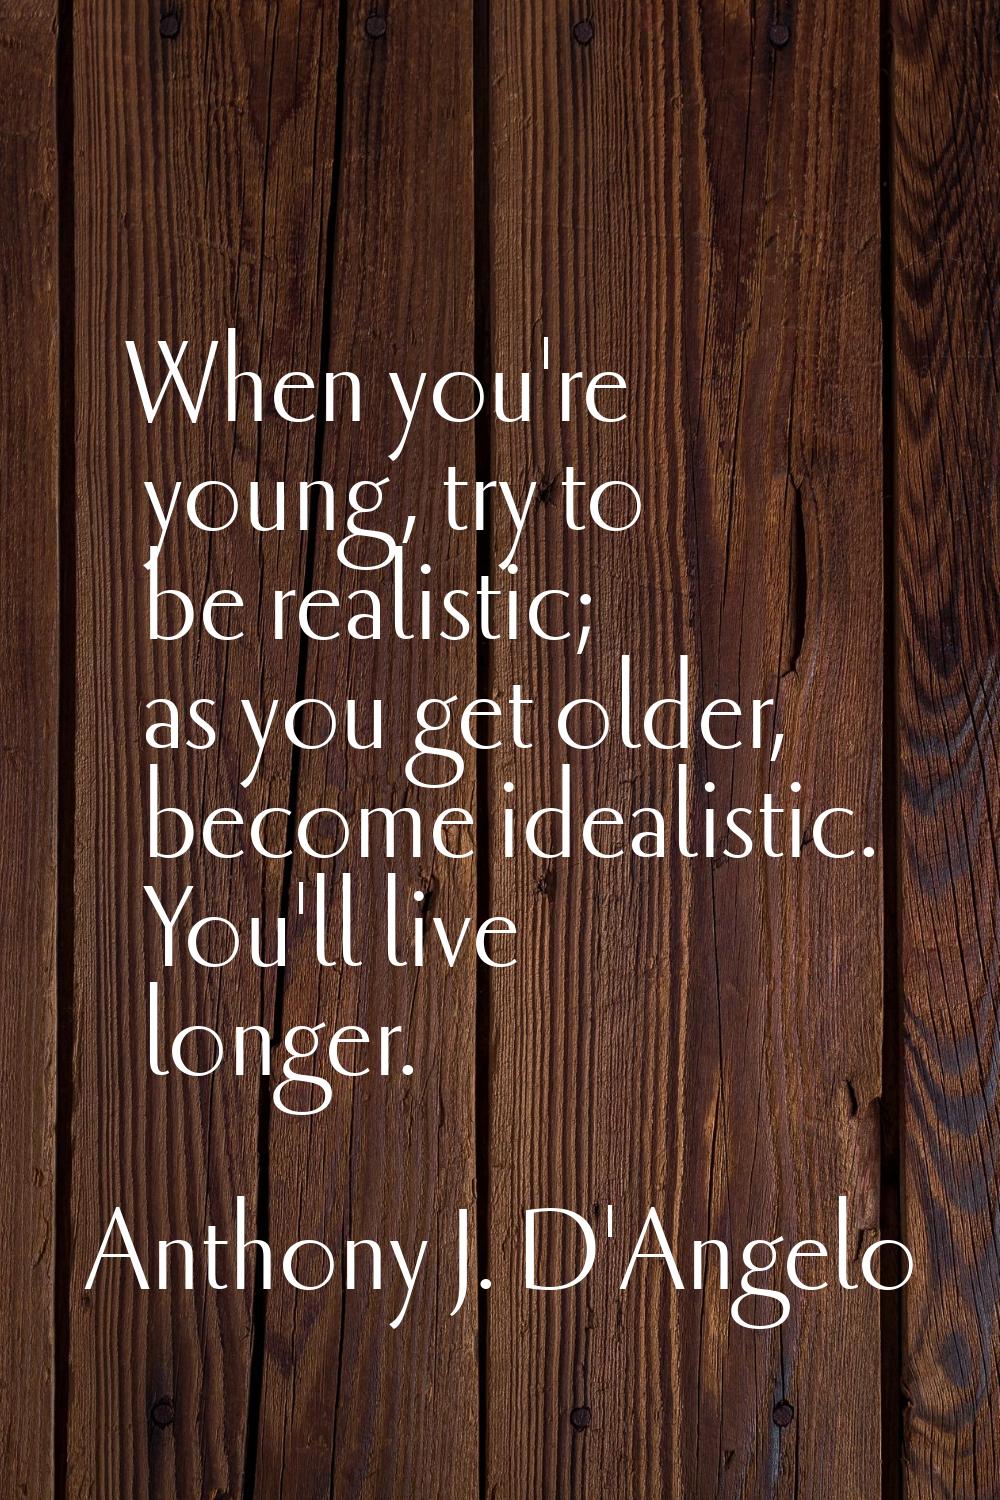 When you're young, try to be realistic; as you get older, become idealistic. You'll live longer.